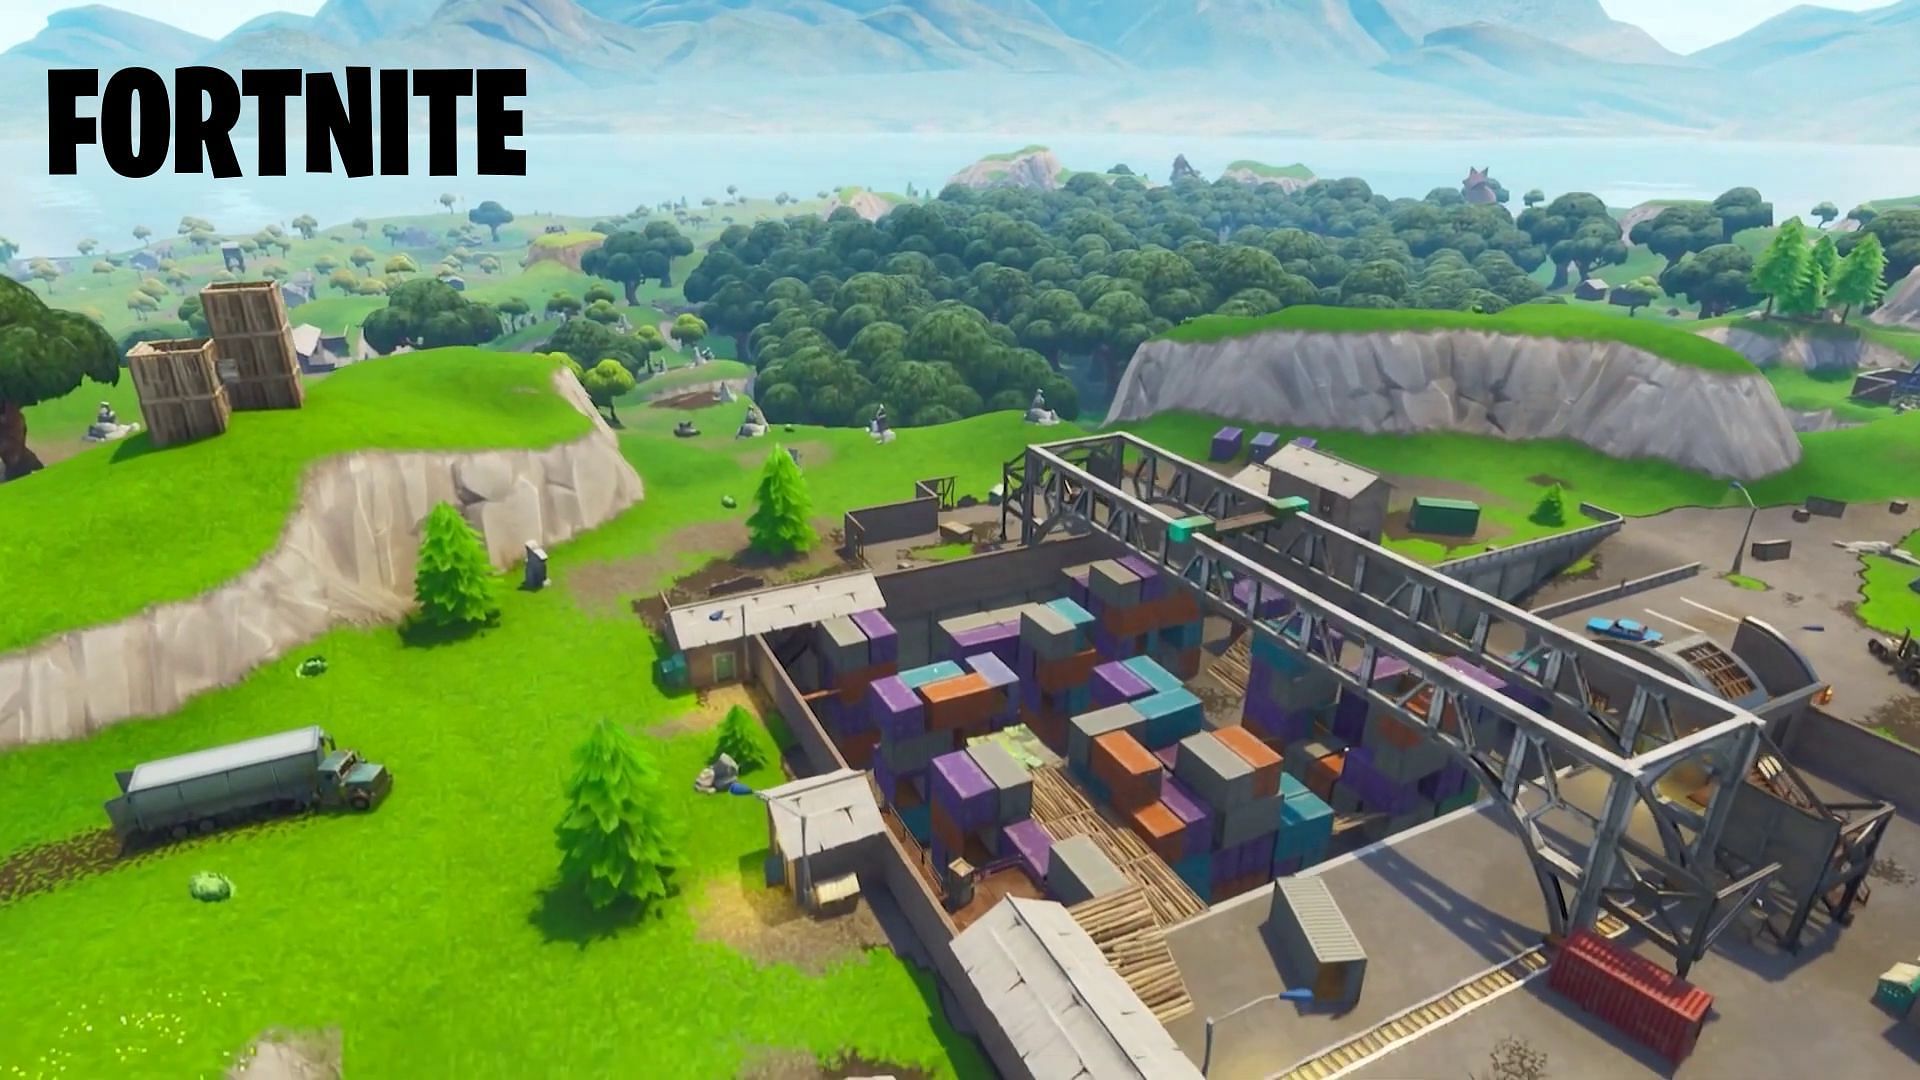 As players find new teasers, the old Fortnite POI may come back.